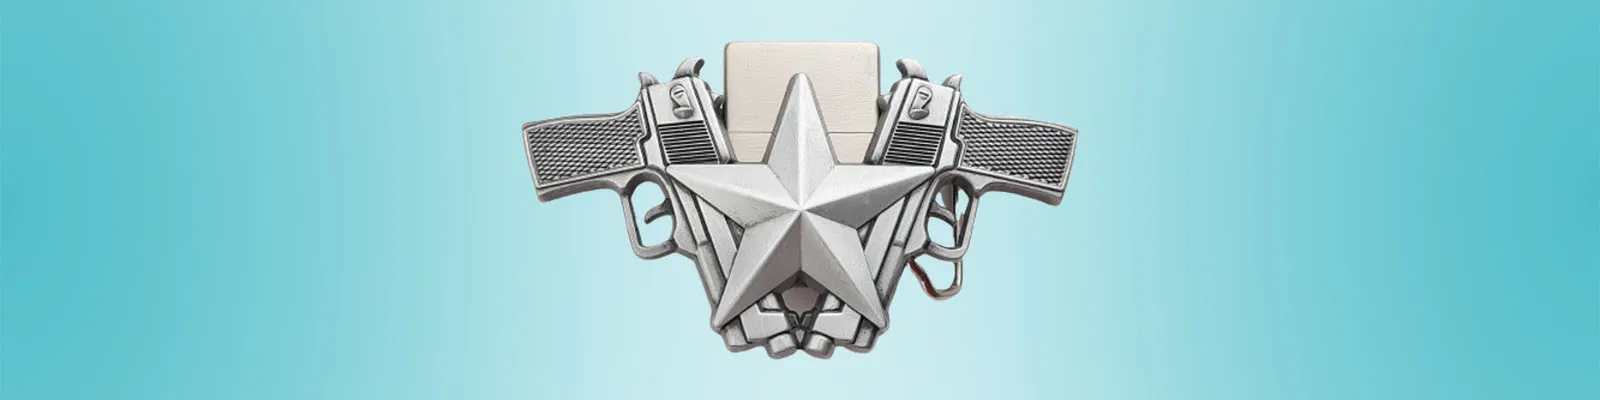 Army, Military & Arms Belt Buckles Category Image | Buckle.de